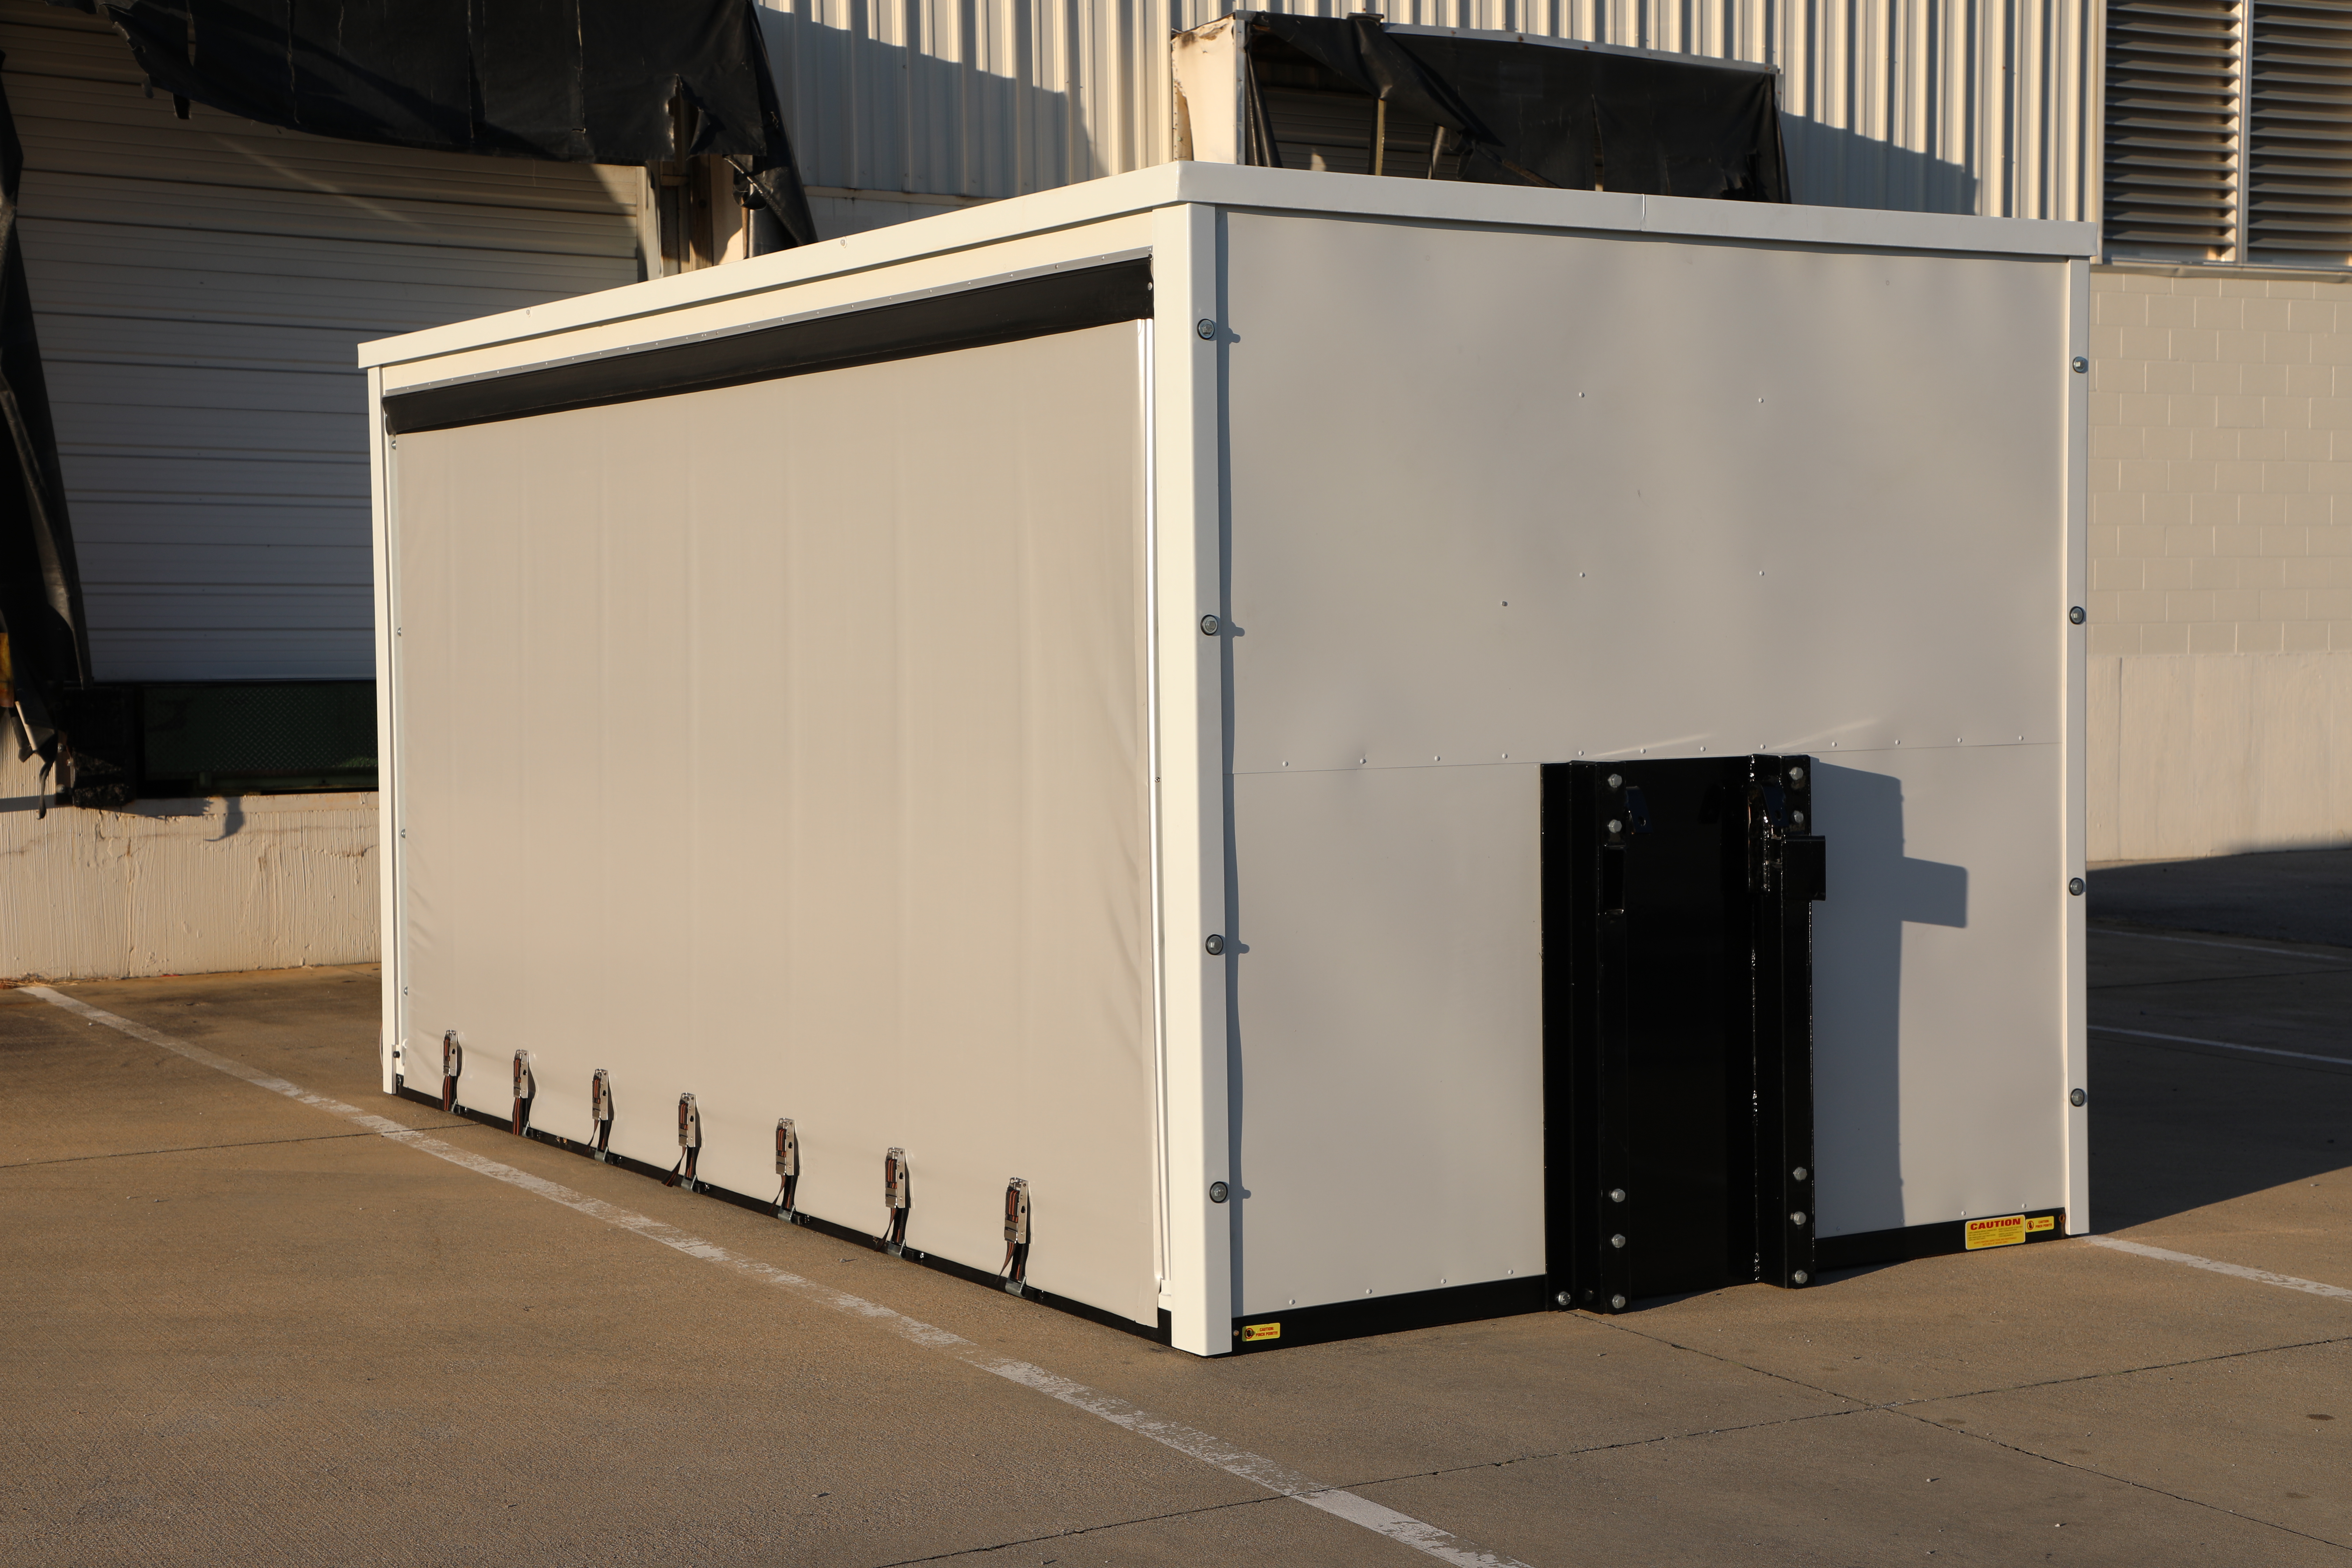 The Titan® C-Series Covered Deck can be detached for on-site dry storage of equipment or pallets, unit photo 32 of 33